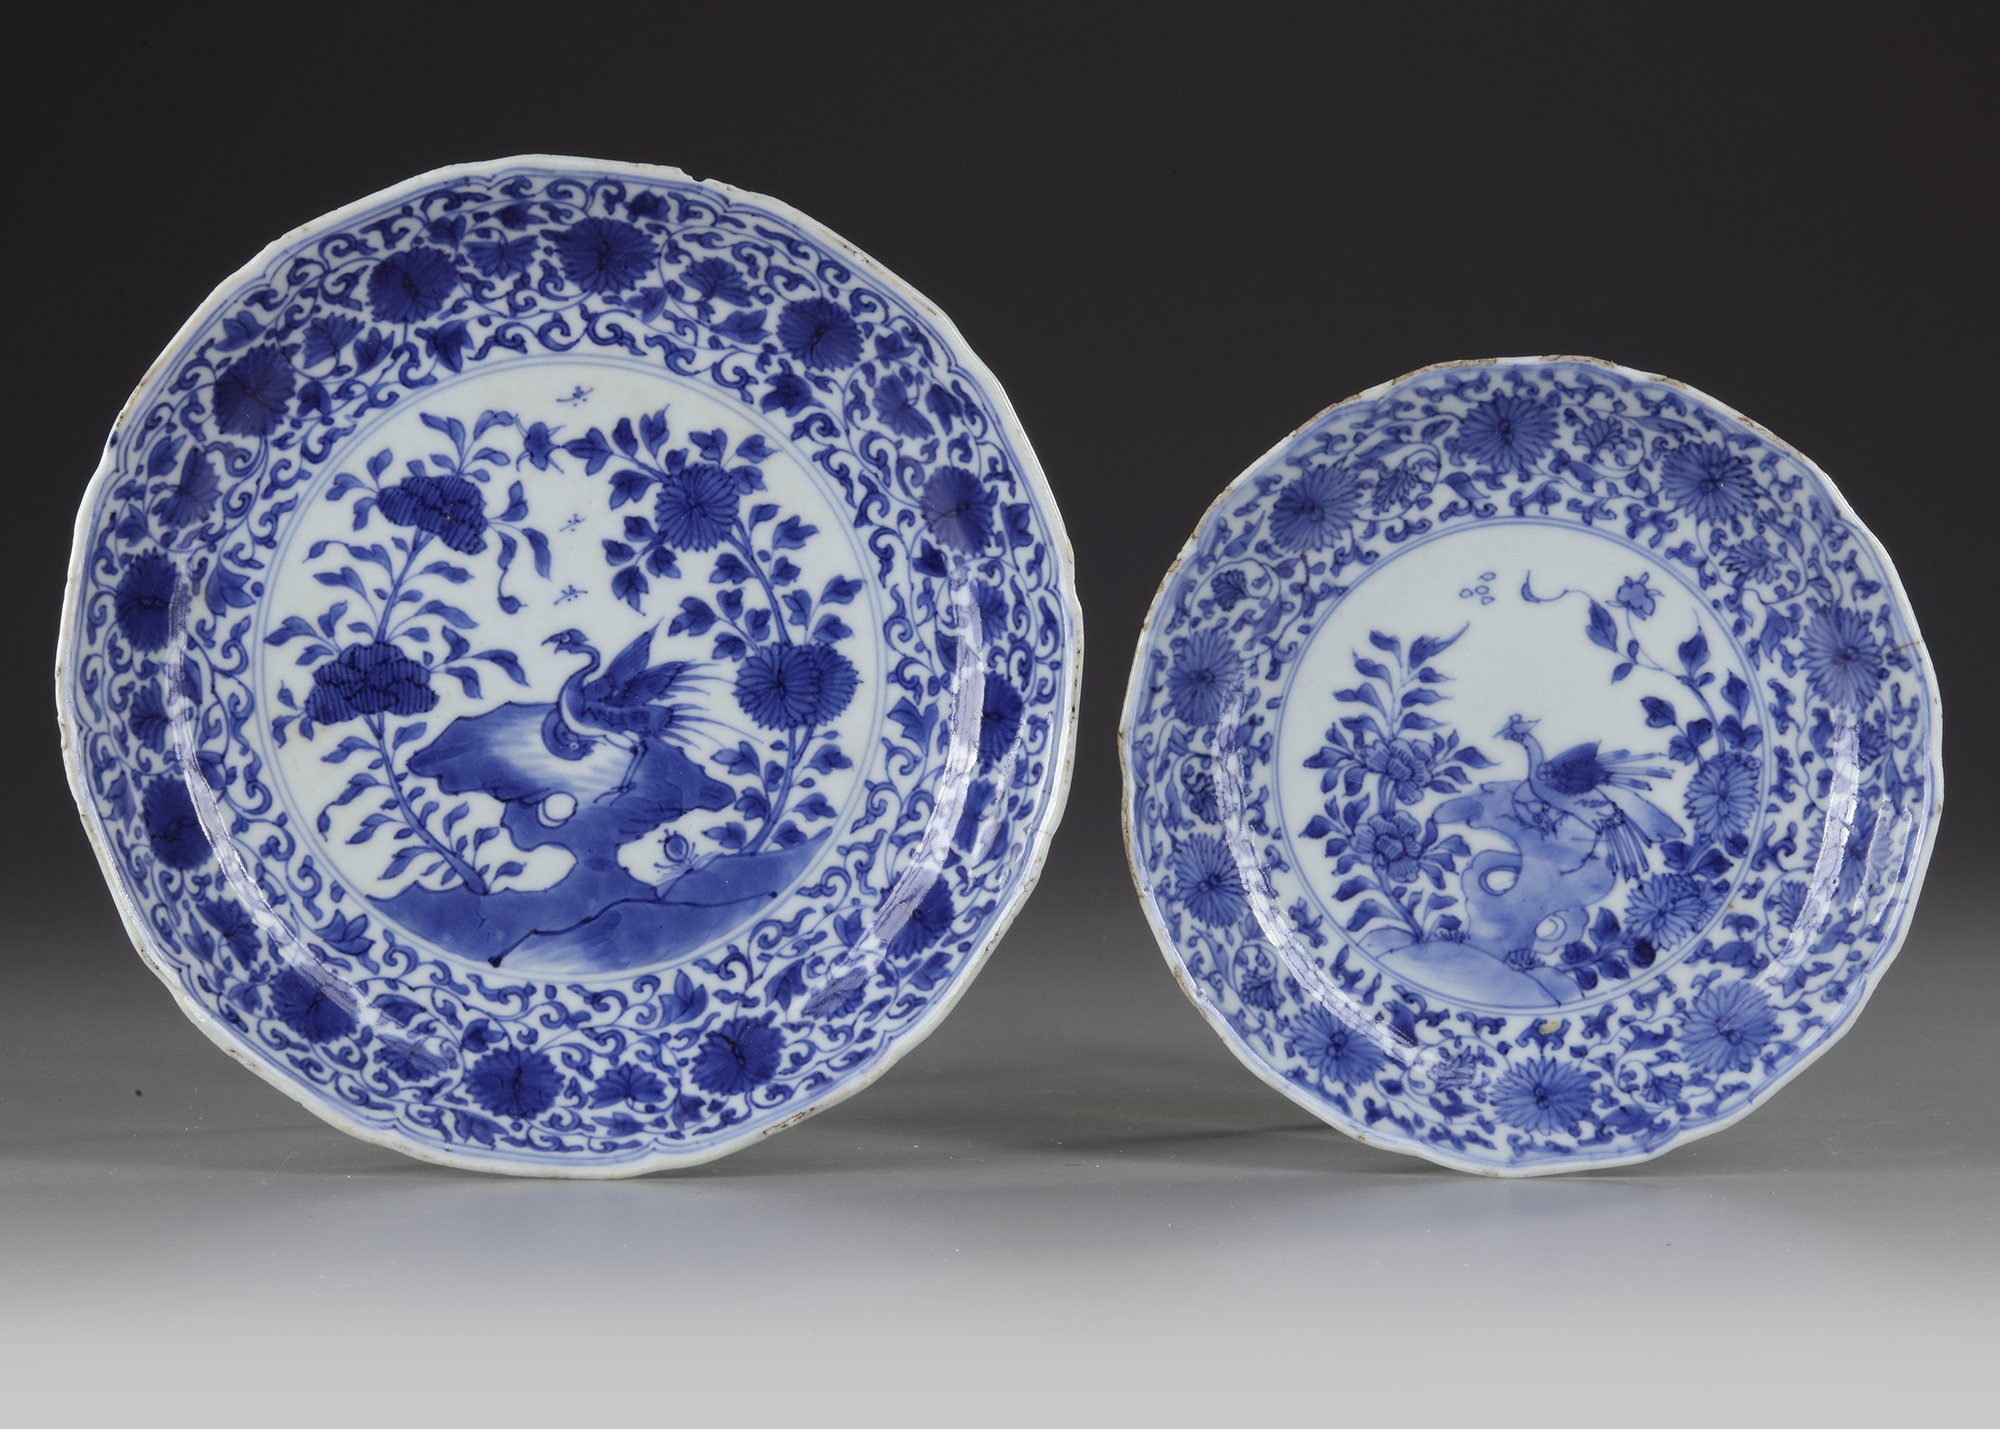 TWO CHINESE BLUE AND WHITE DISHES, KANGXI PERIOD (1662-1722)